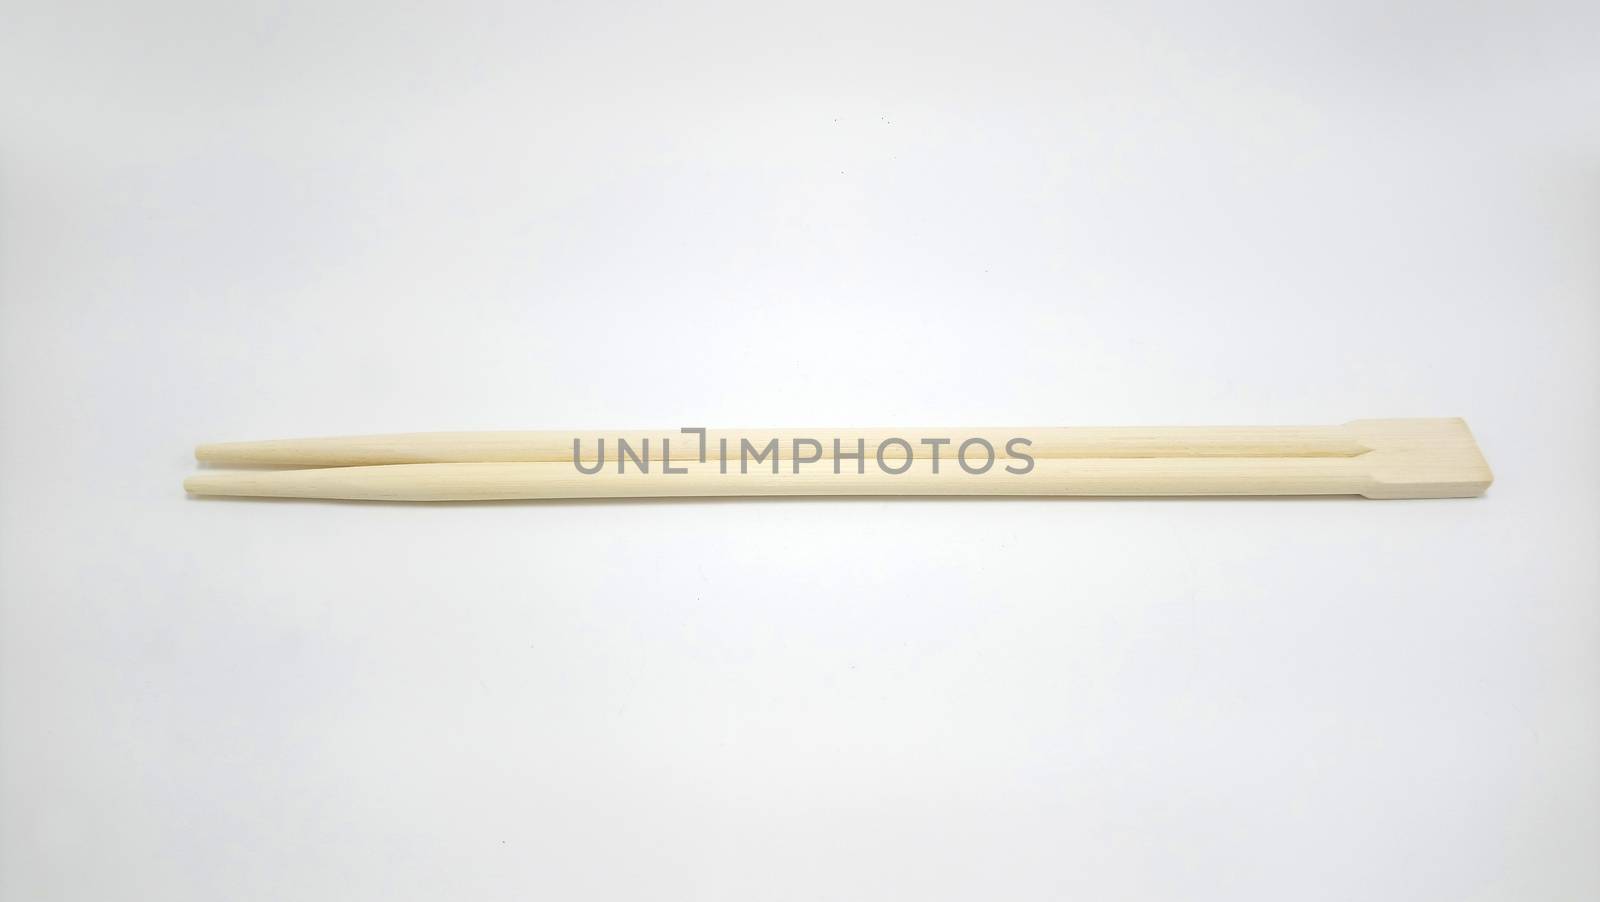 Chinese brown wooden chopsticks use as eating utensil